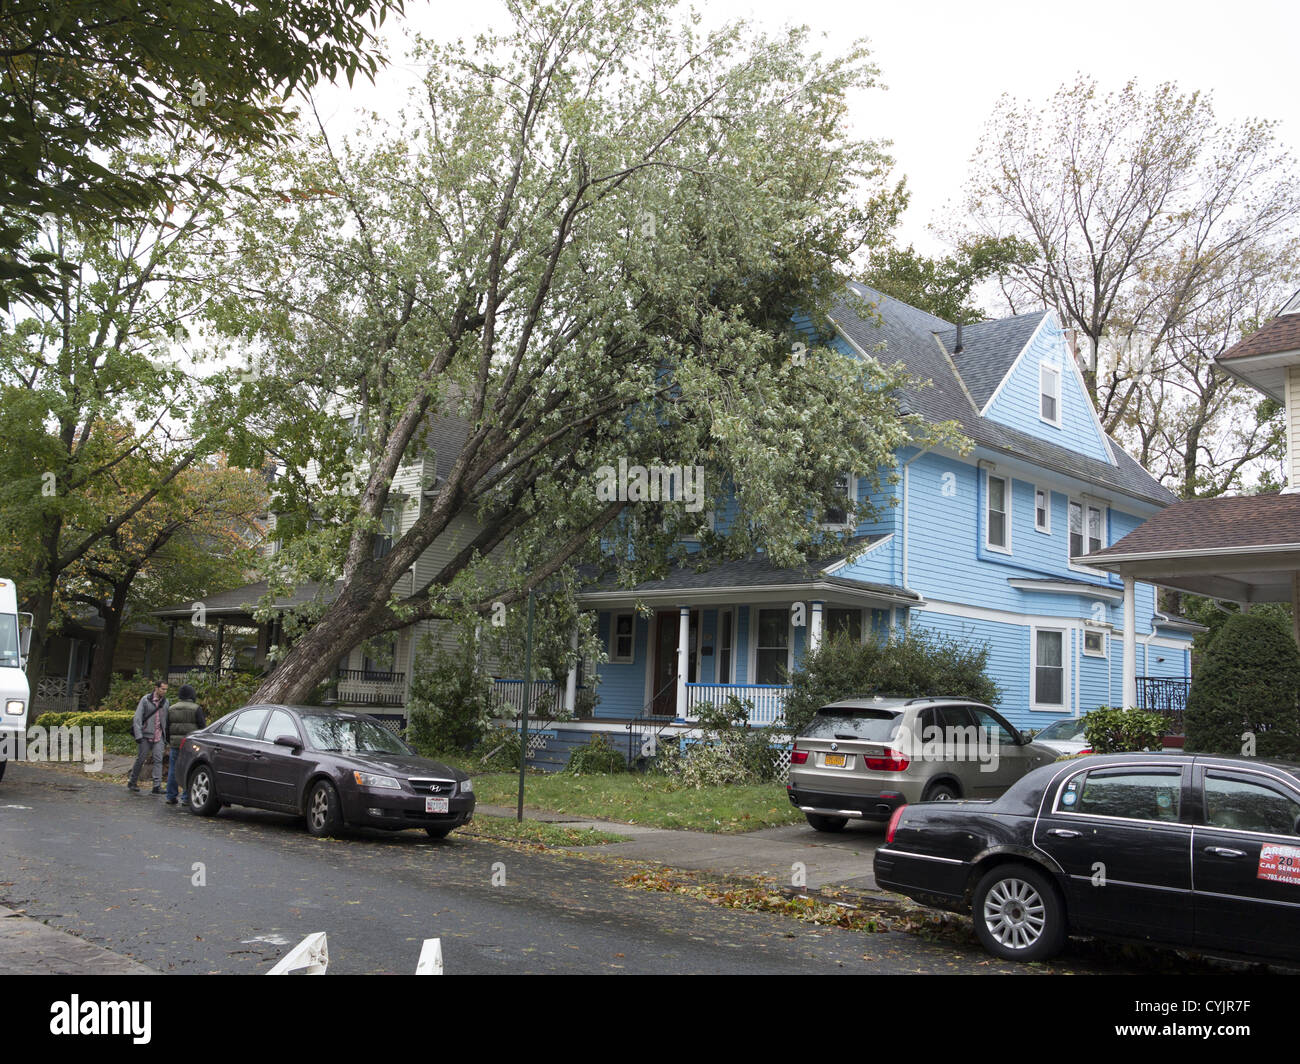 The aftermath of Hurricane Sandy can be seen all over NYC as with this downed tree in the Ditmas Park section of Brooklyn. Stock Photo